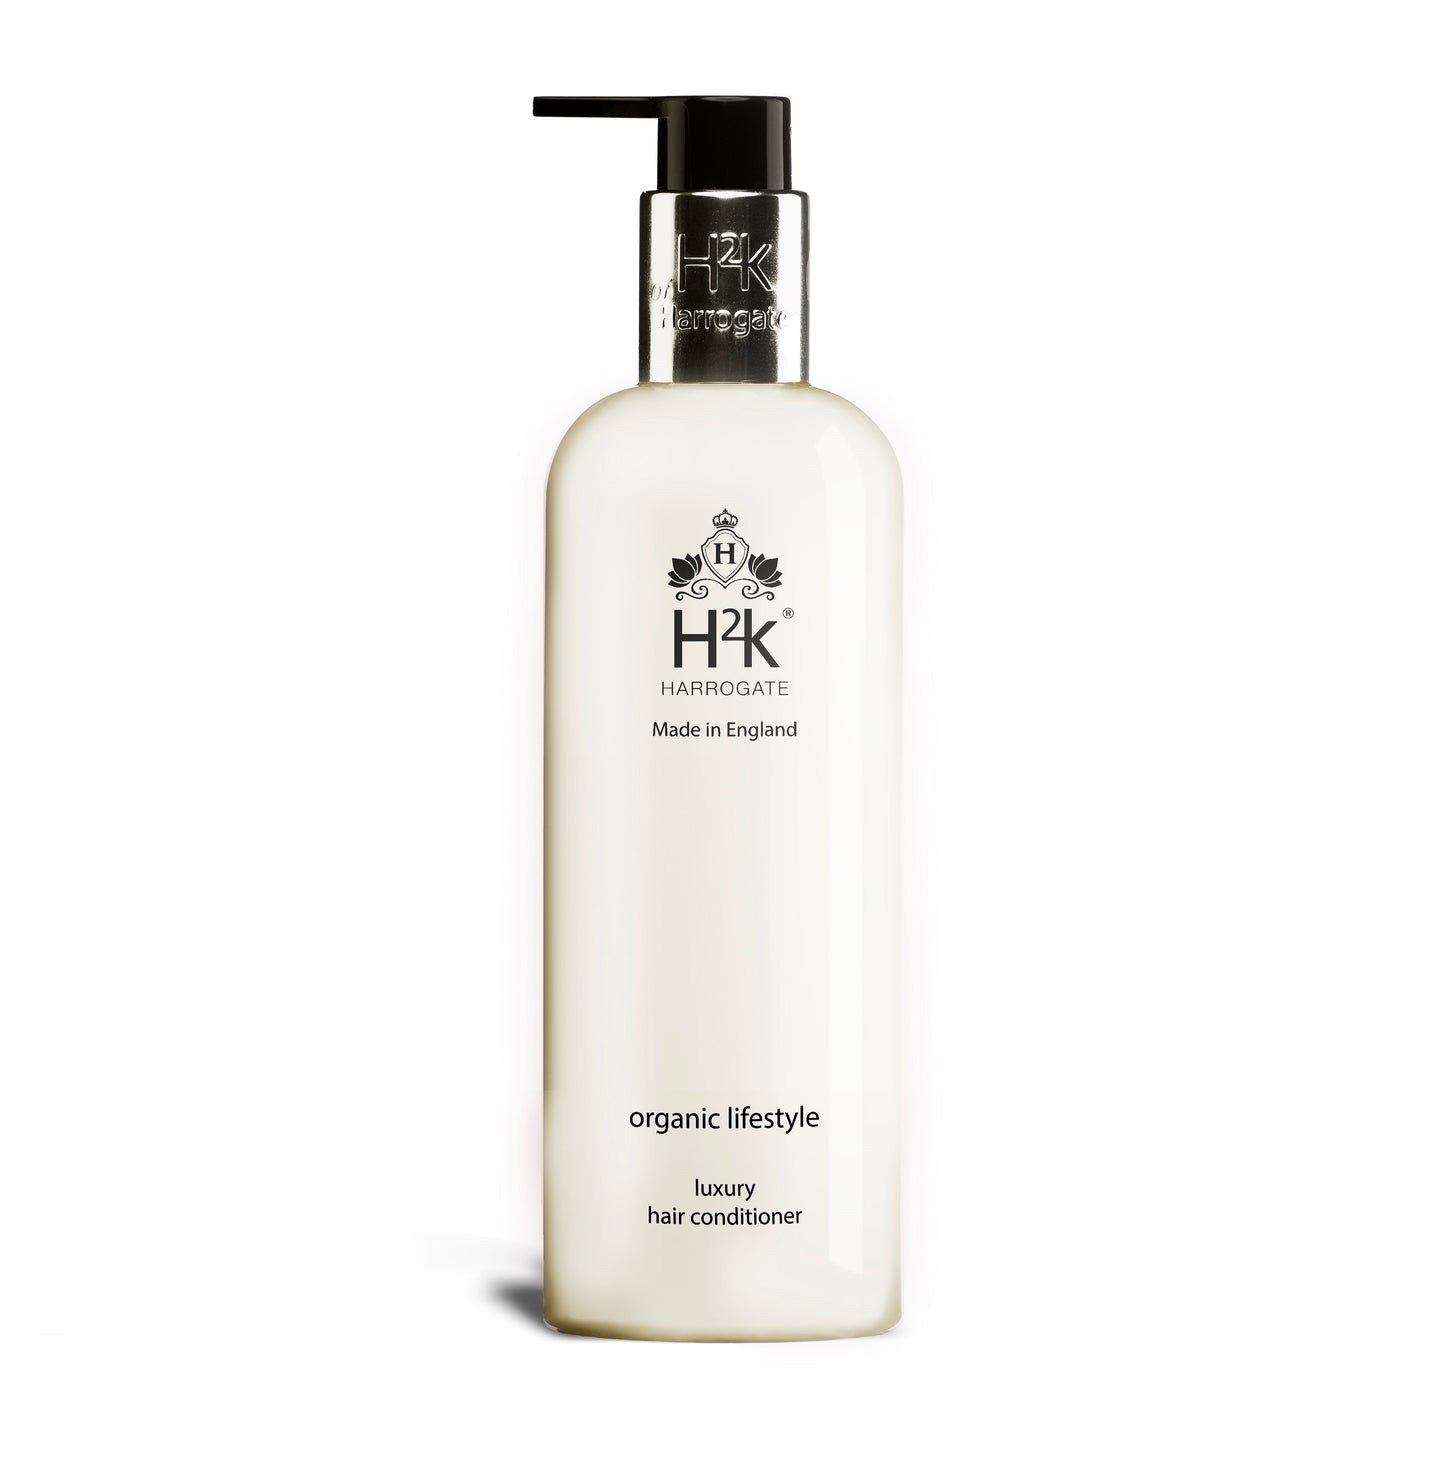 Nourishing Hair Conditioner with Aloe Vera and Seakelp for Thick and Curly Hair.